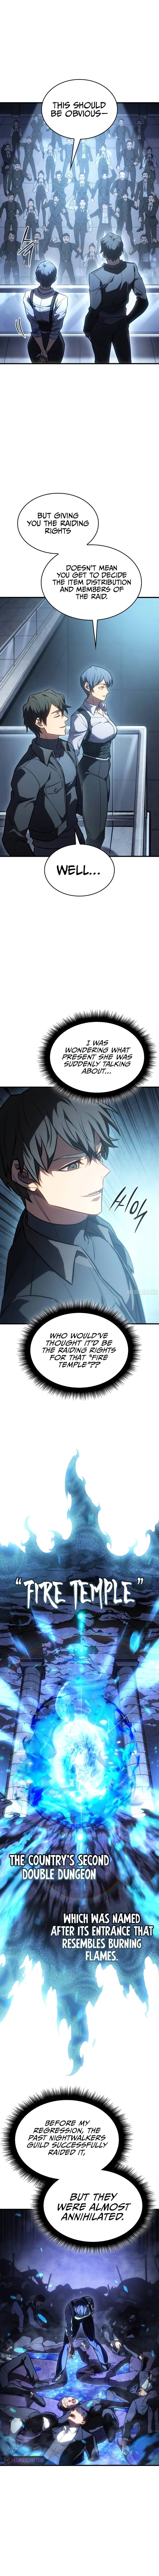 regressing-with-the-kings-power-chap-34-12